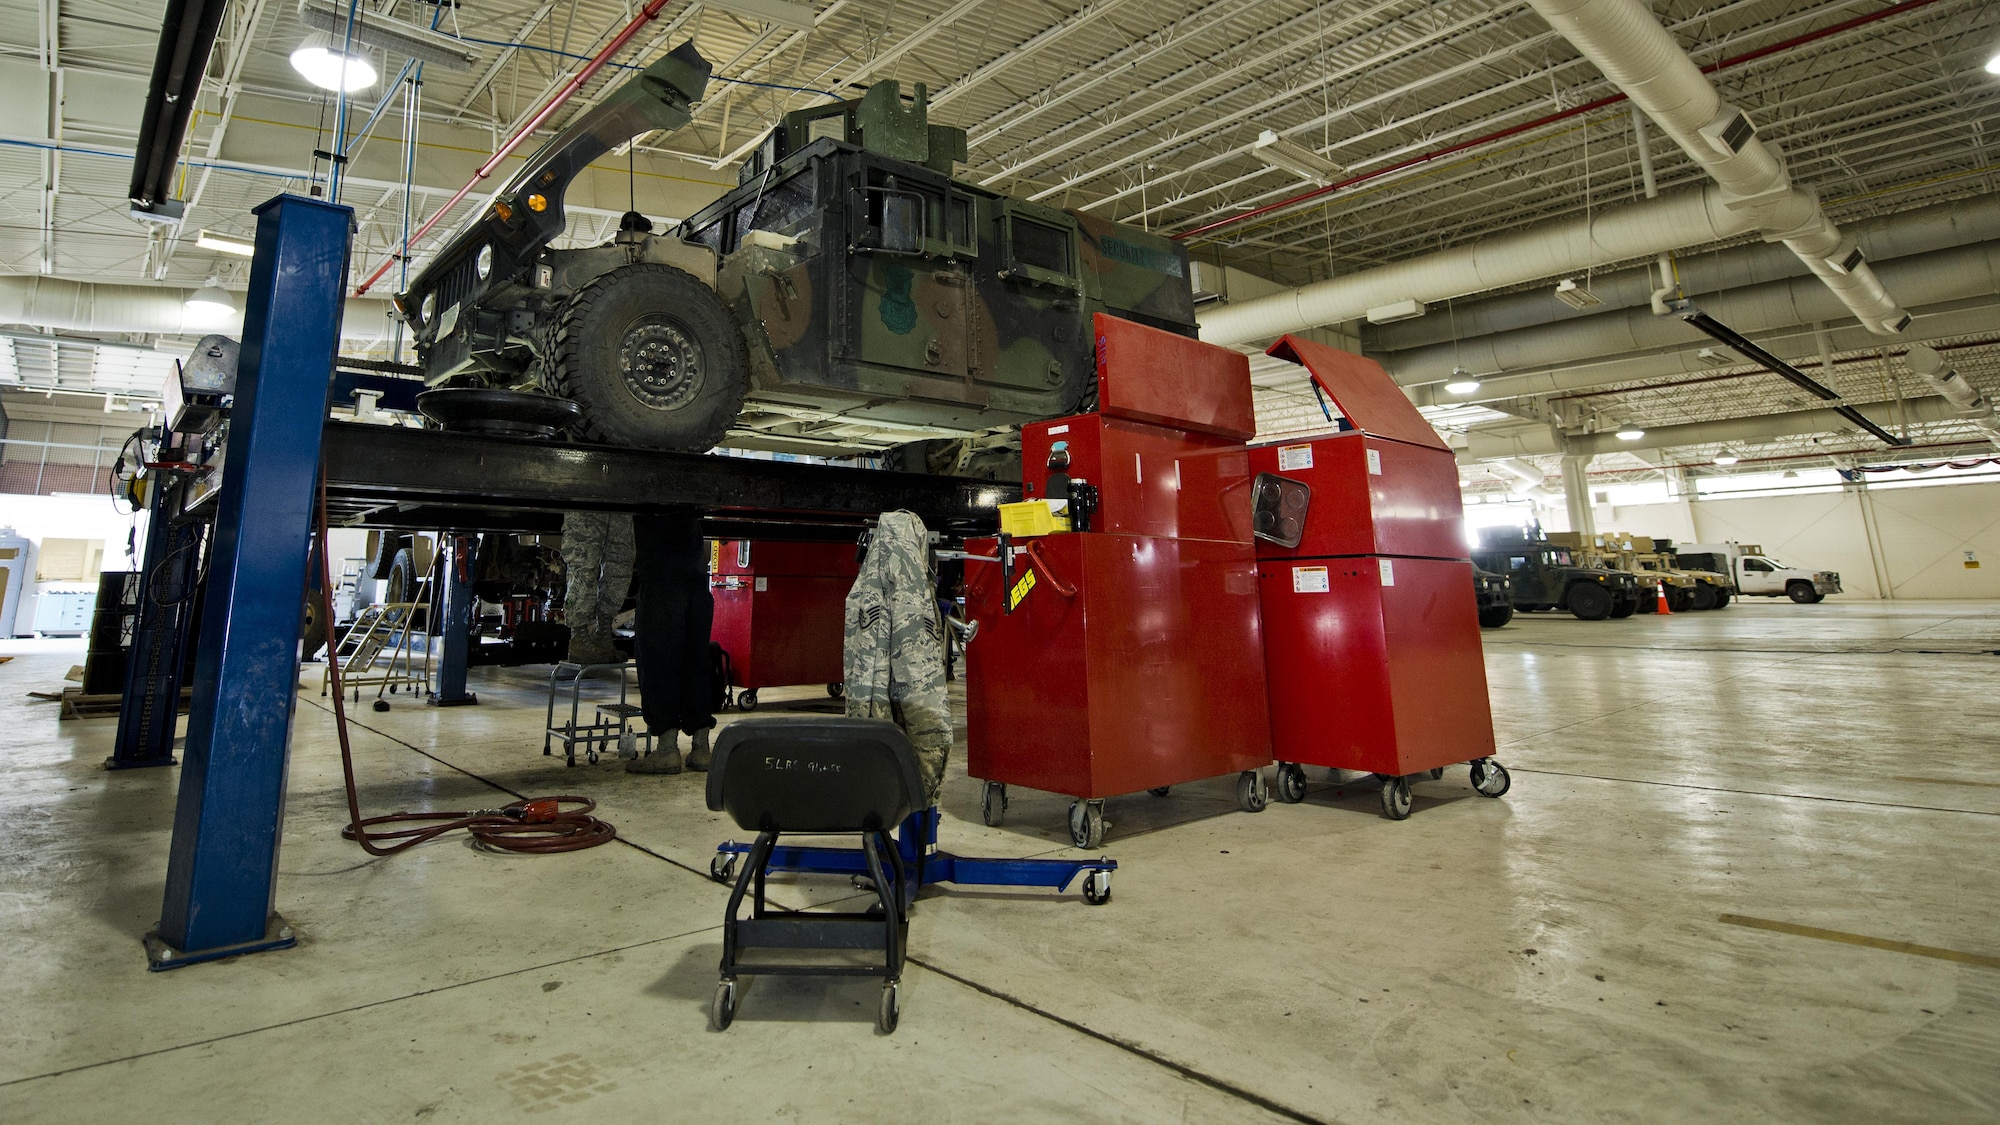 Airmen from the 5th Logistics Readiness Squadron maintain a Humvee in the Defender Dome at Minot Air Force Base, N.D., July 28, 2016. The 91st Security Support Squadron is specifically responsible for preventative maintenance inspections and troubleshooting, and everything from electrical repair to transmission replacement, on armored Humvees and Bearcats. (U.S. Air Force photos/Airman 1st Class J.T. Armstrong)